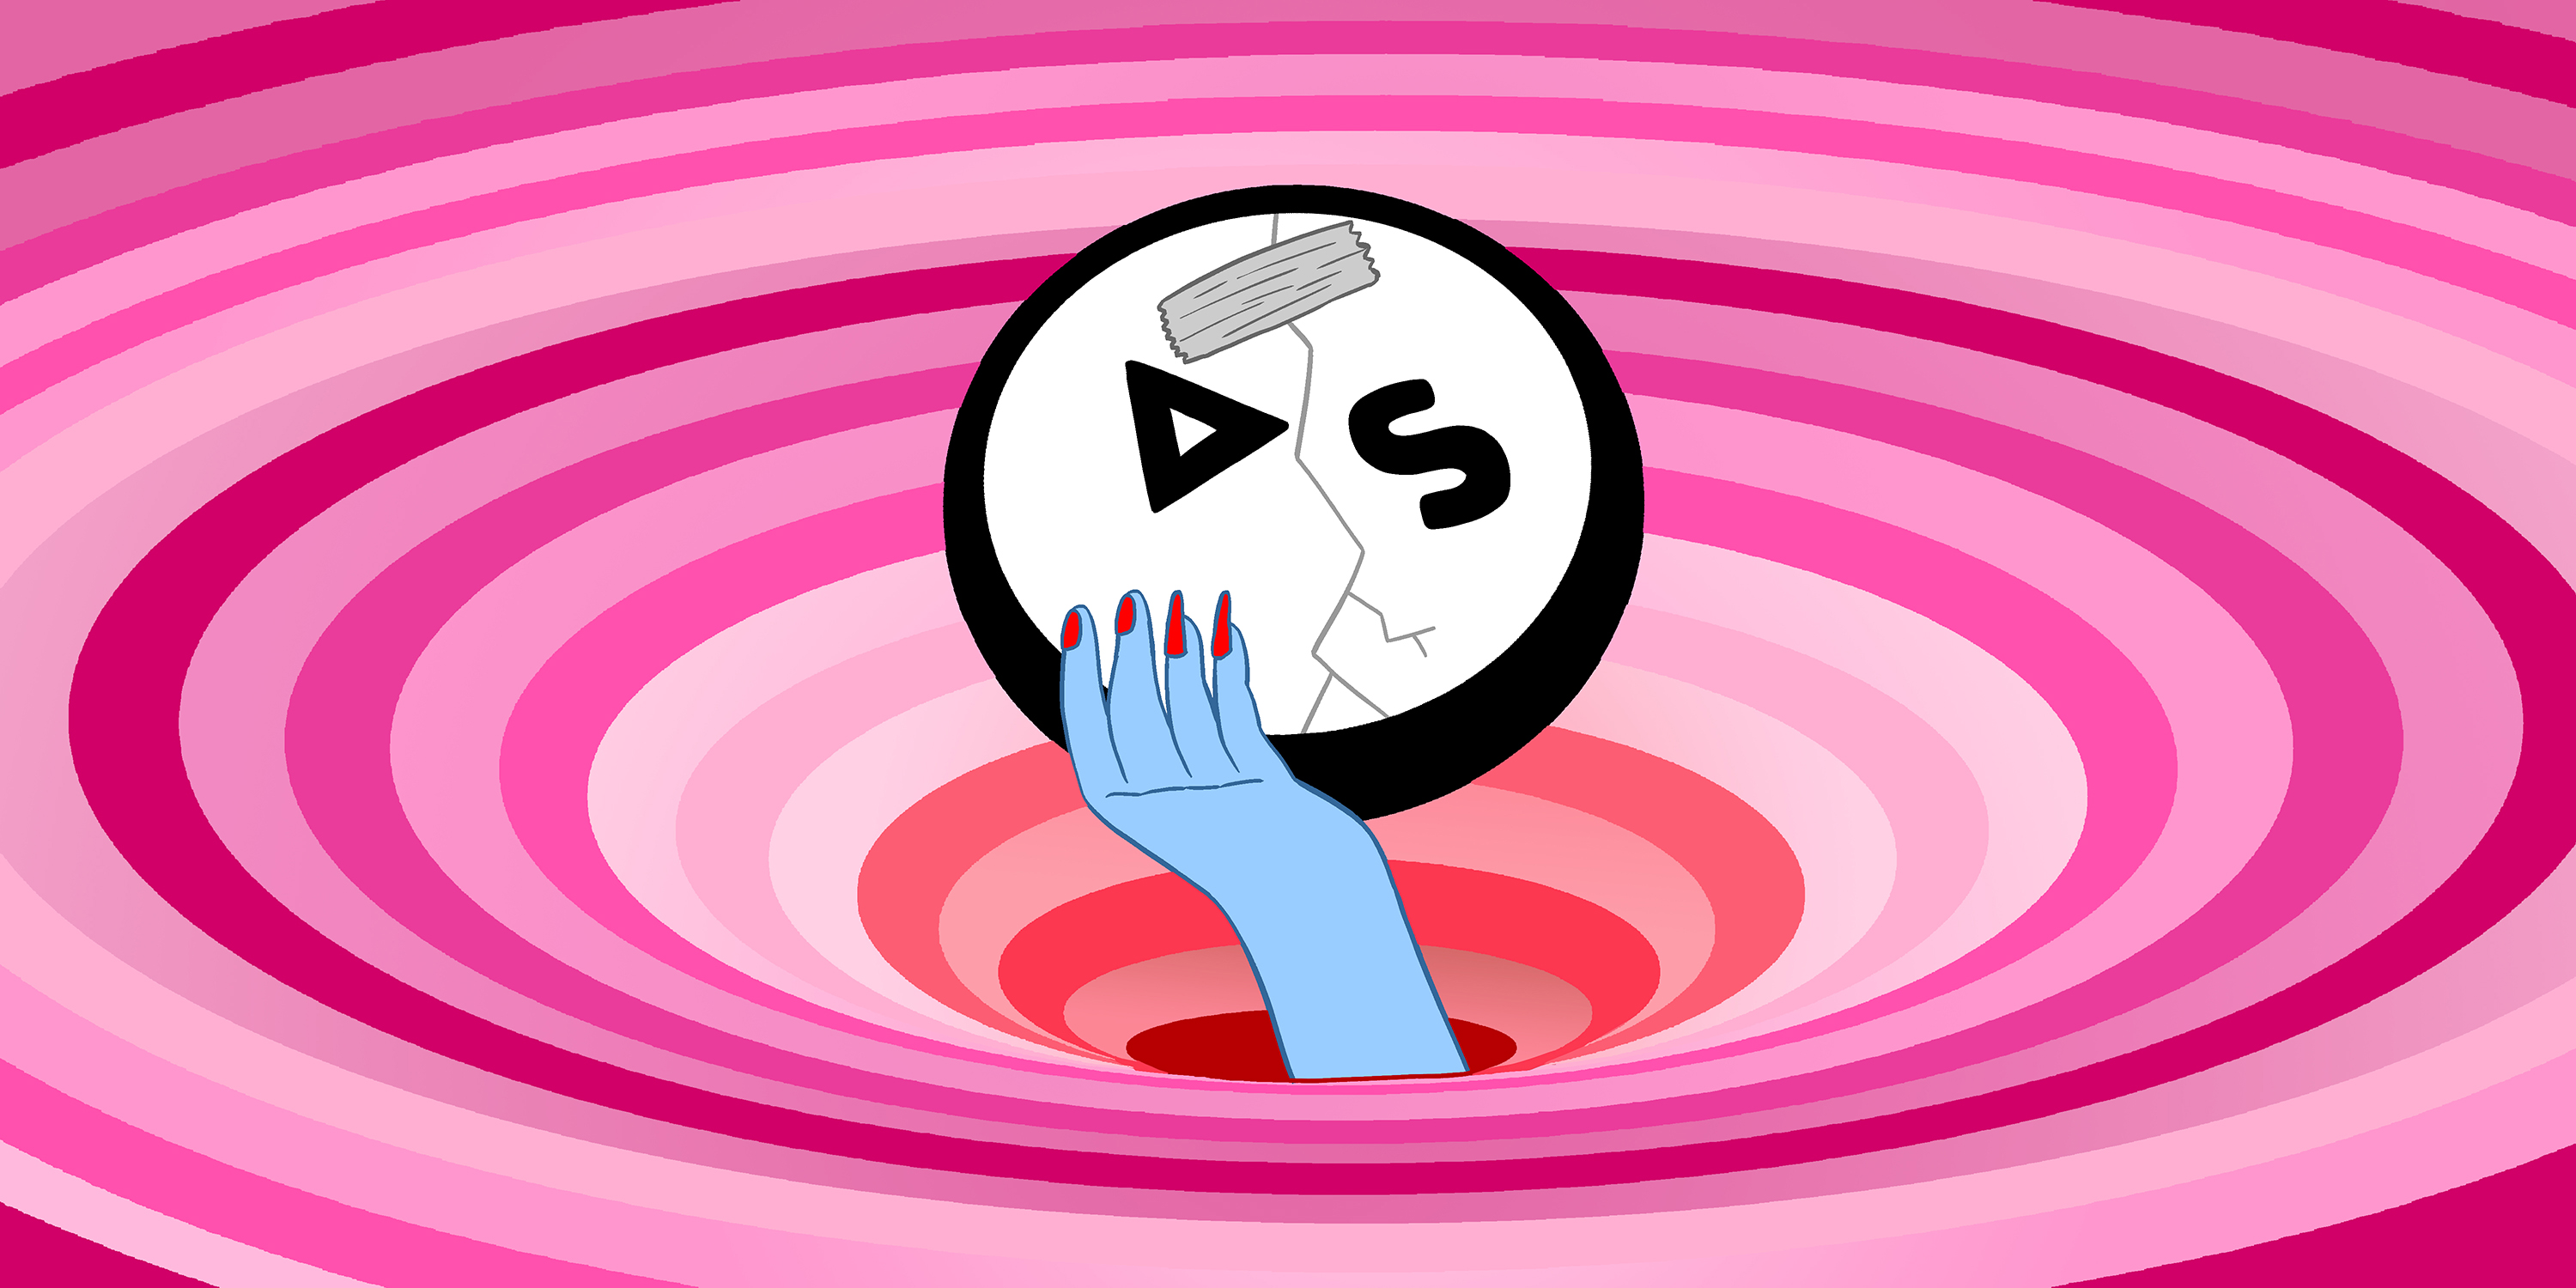 A hand holding a cracked Autostraddle logo reaches out of a pink whirlpool